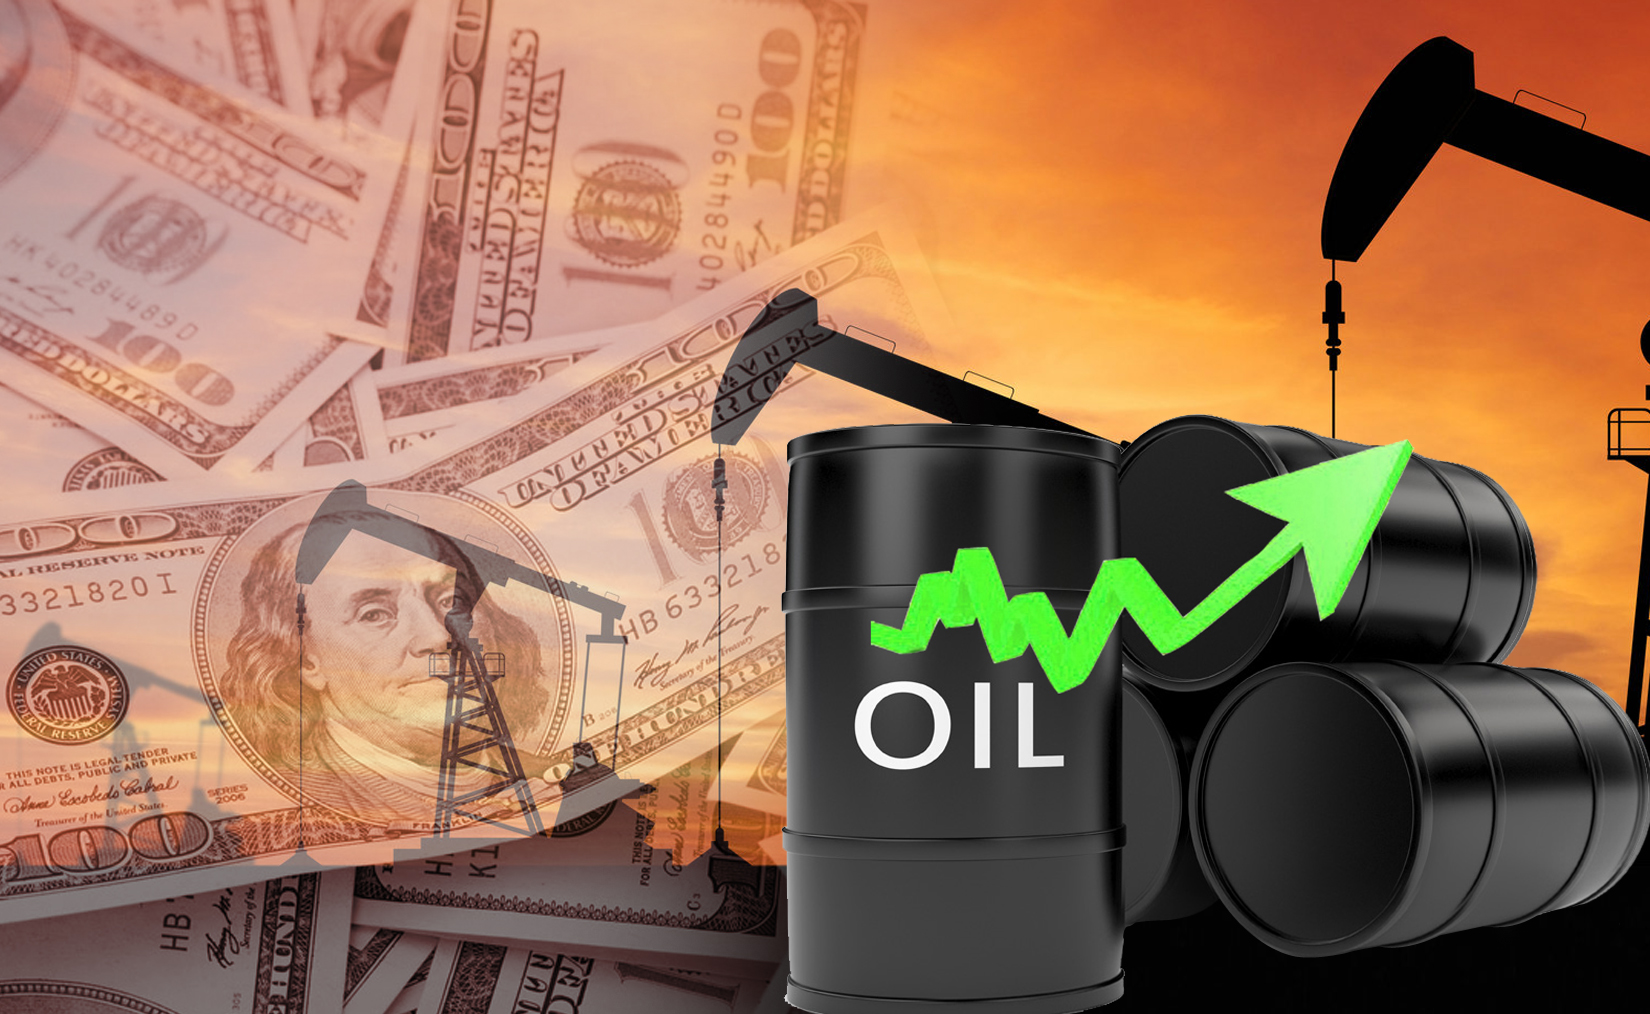 Kuwait oil gain 63 cents Wed. to USD 50.44 pb - KPC                                                                                                                                                                                                       